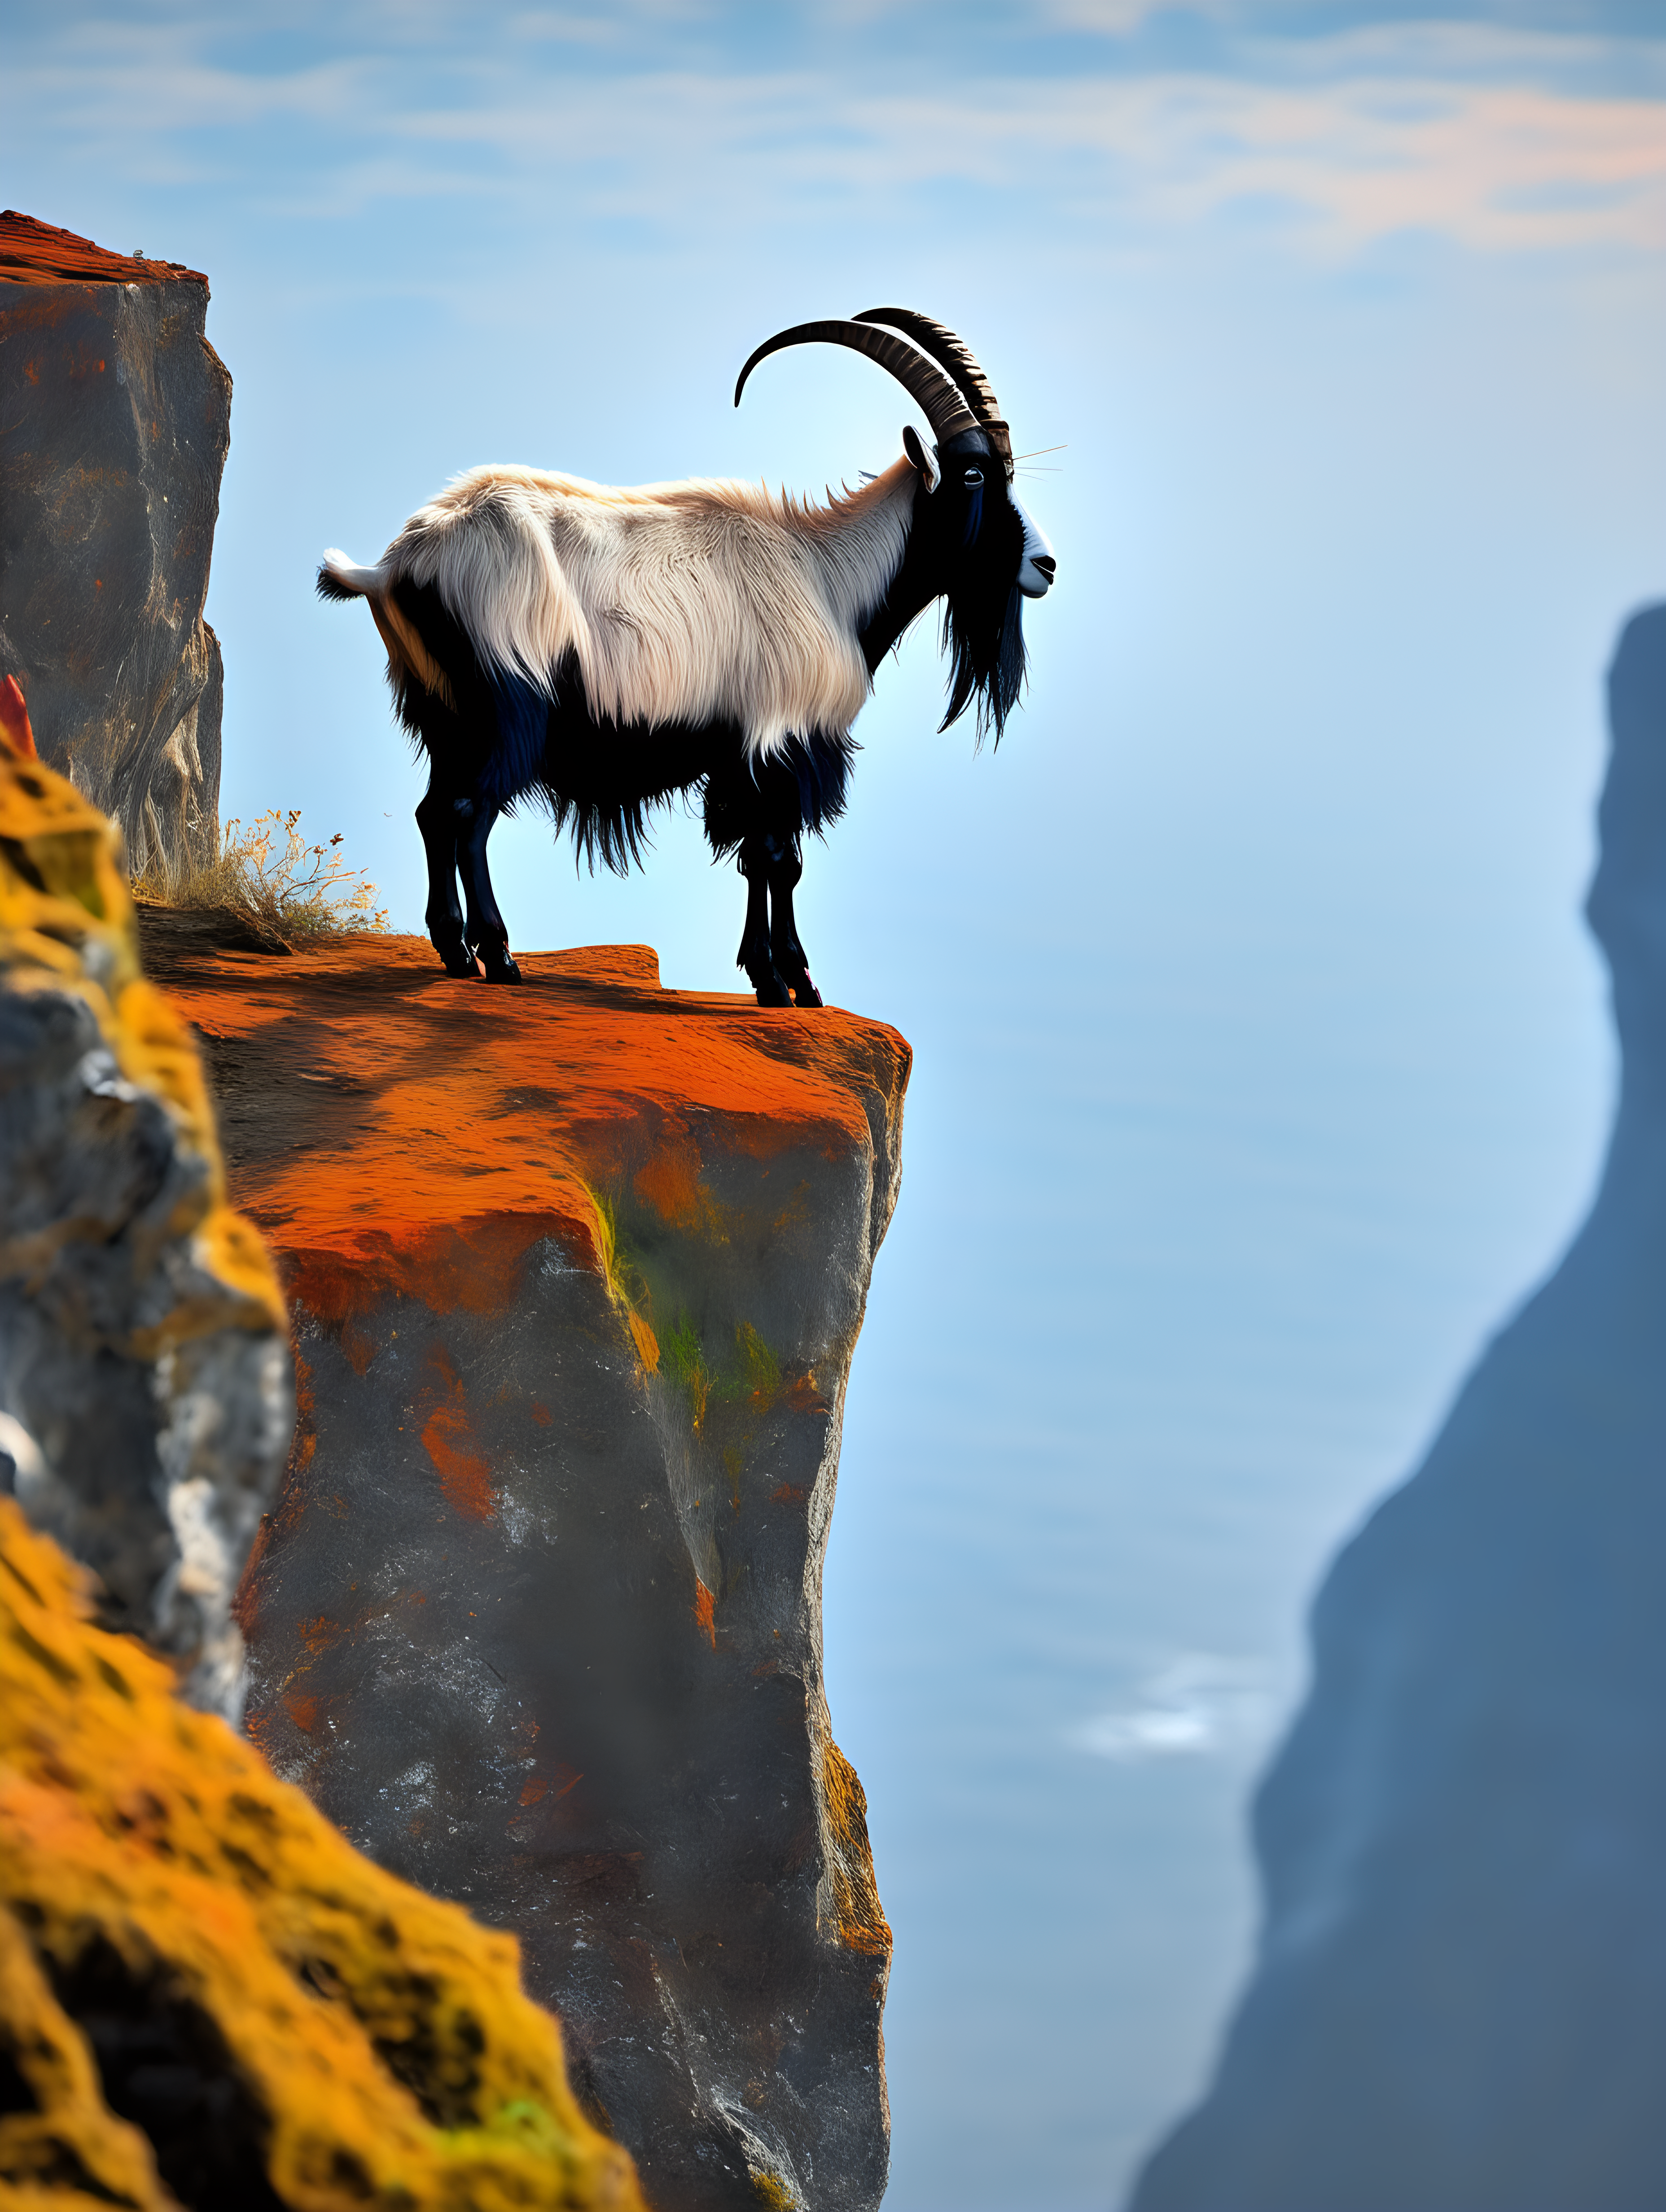 wild goat on the edge of a cliff